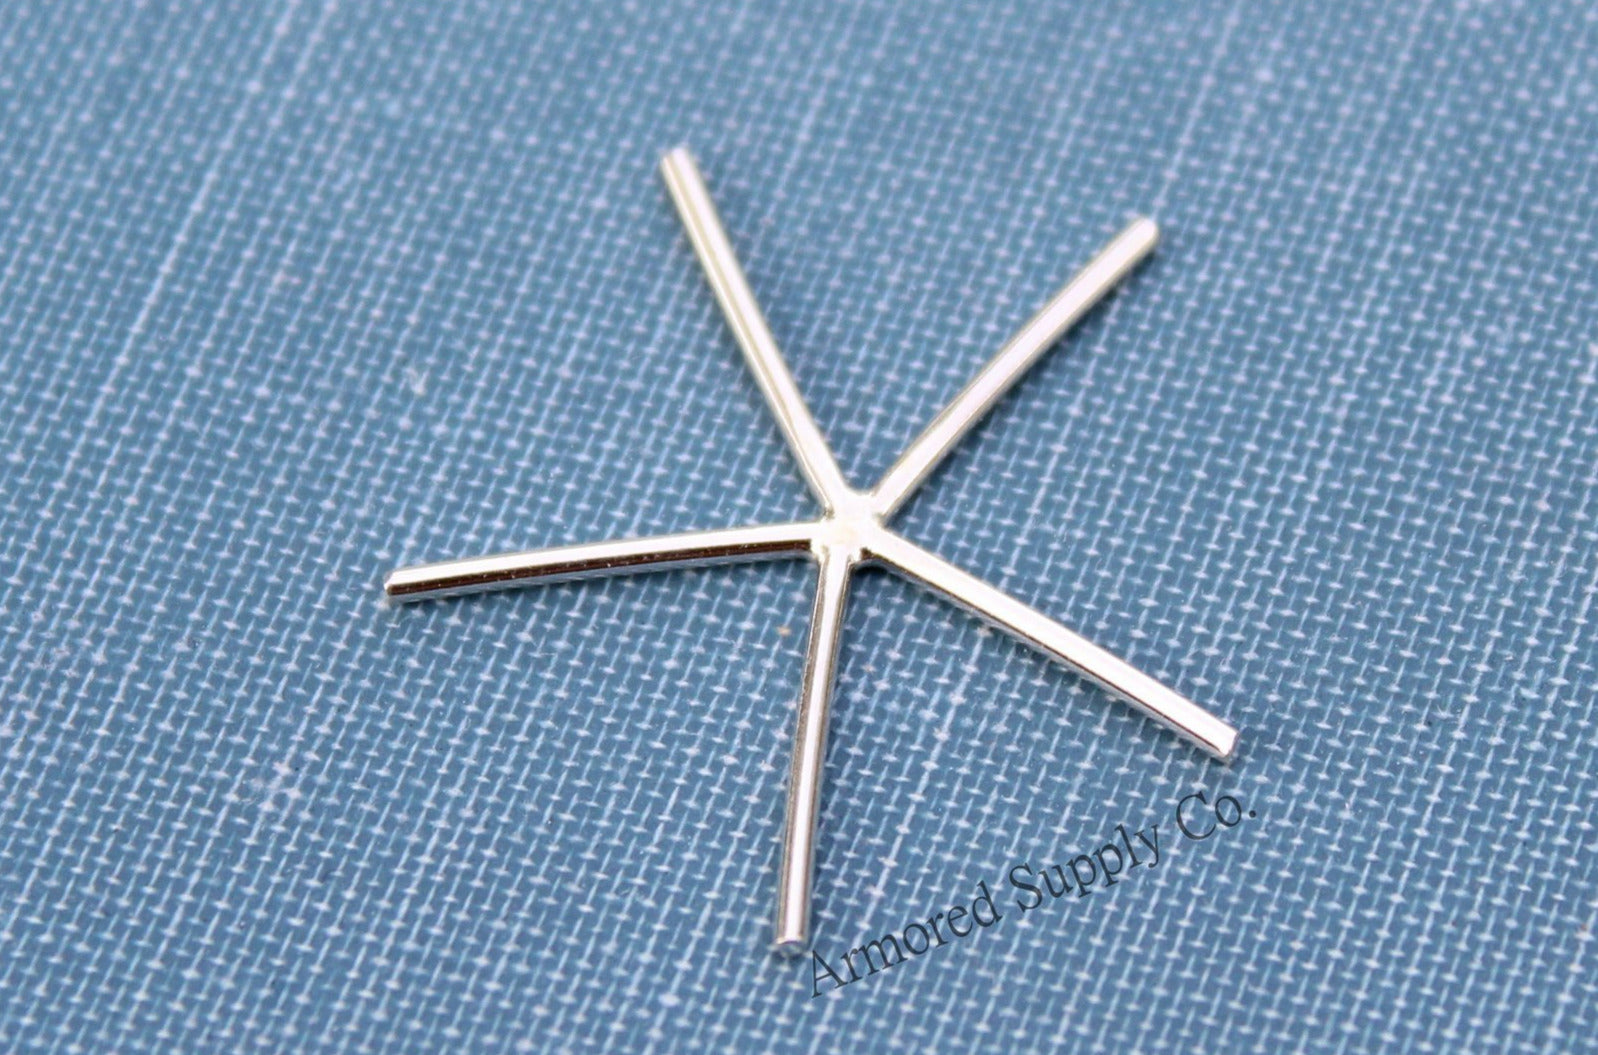 5 Prong Claw Only Blank Raw Stone Setting, Raw Stones, Wholesale Blanks, Raw Stones, Pendant, DIY Jewelry, Silver Blanks, Jewelry Supplies